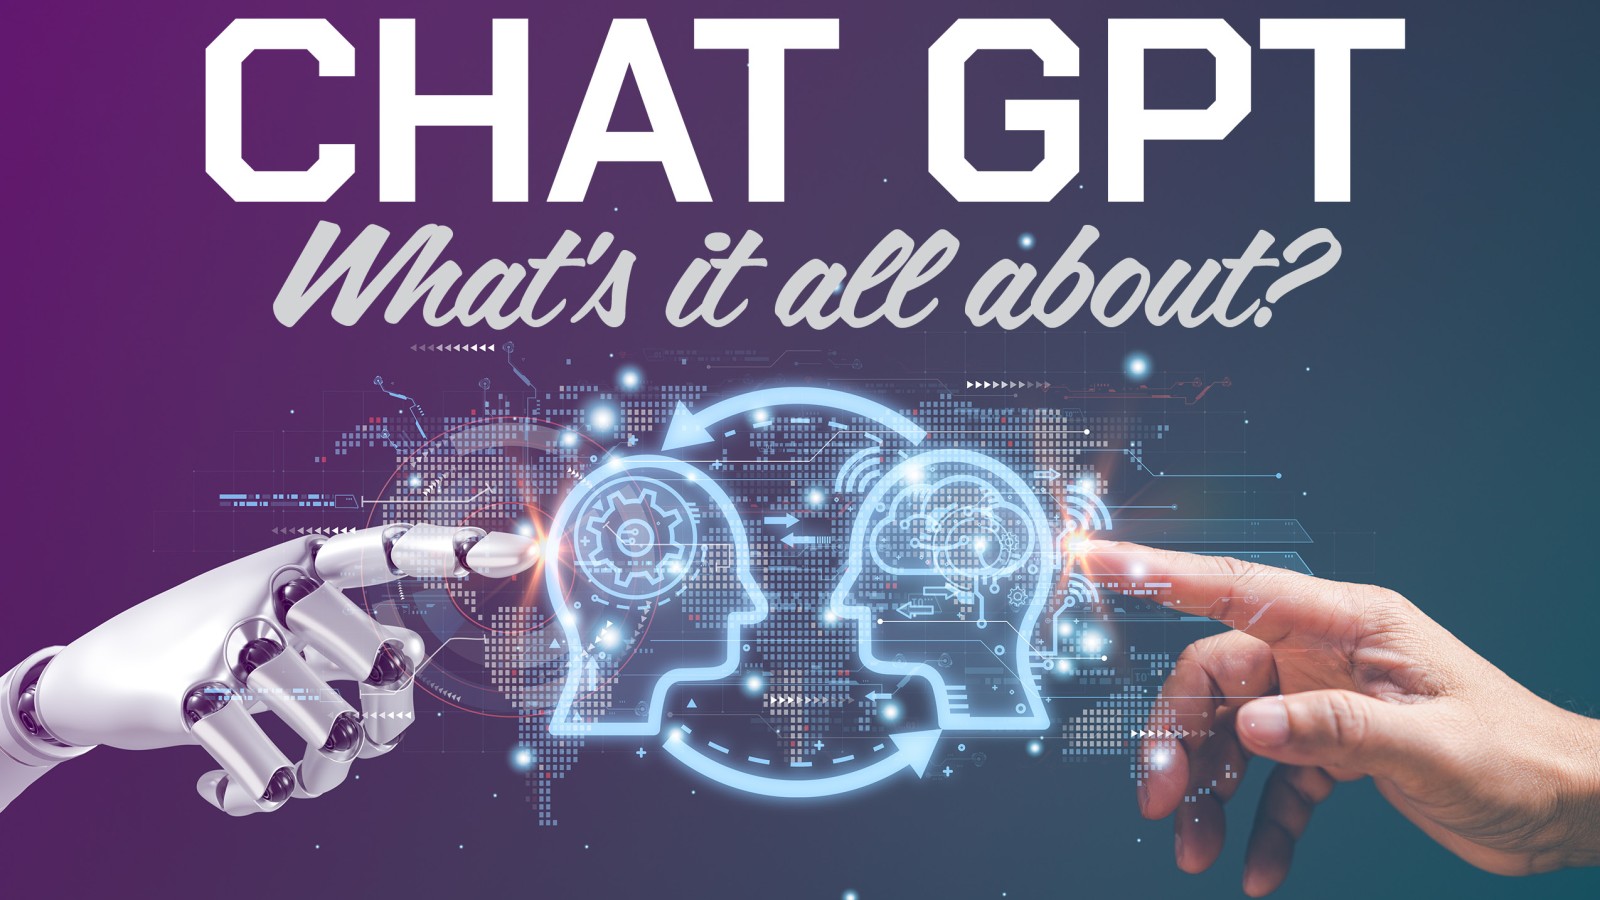 ChatGPT graphic asking What's it all about